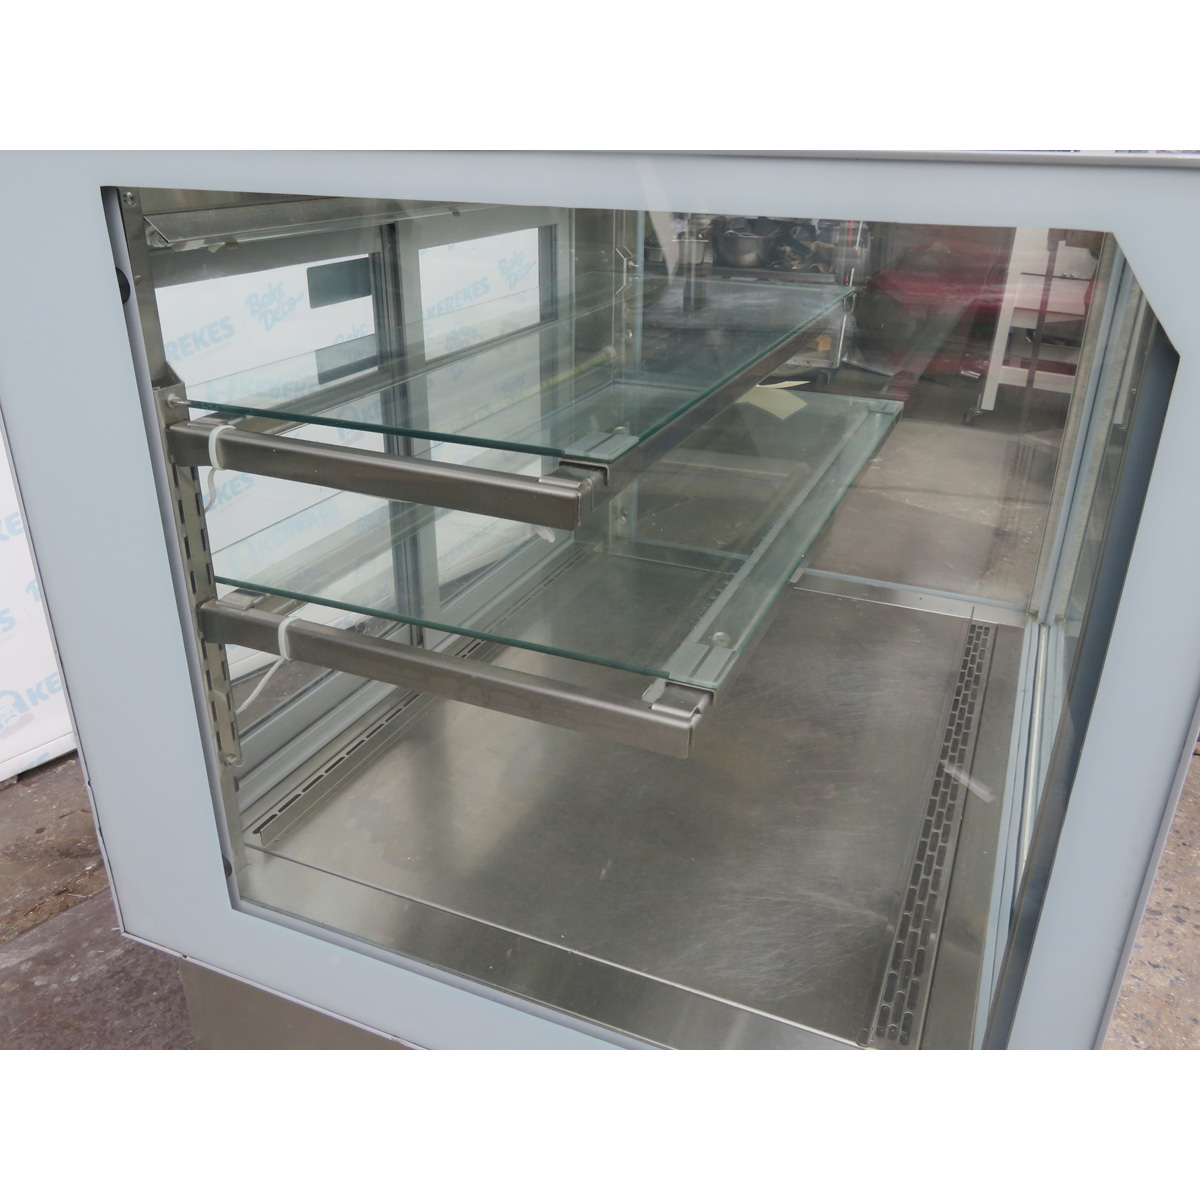 Federal ITR3626 Refrigerated Counter Display Case (Drop-In) image 2